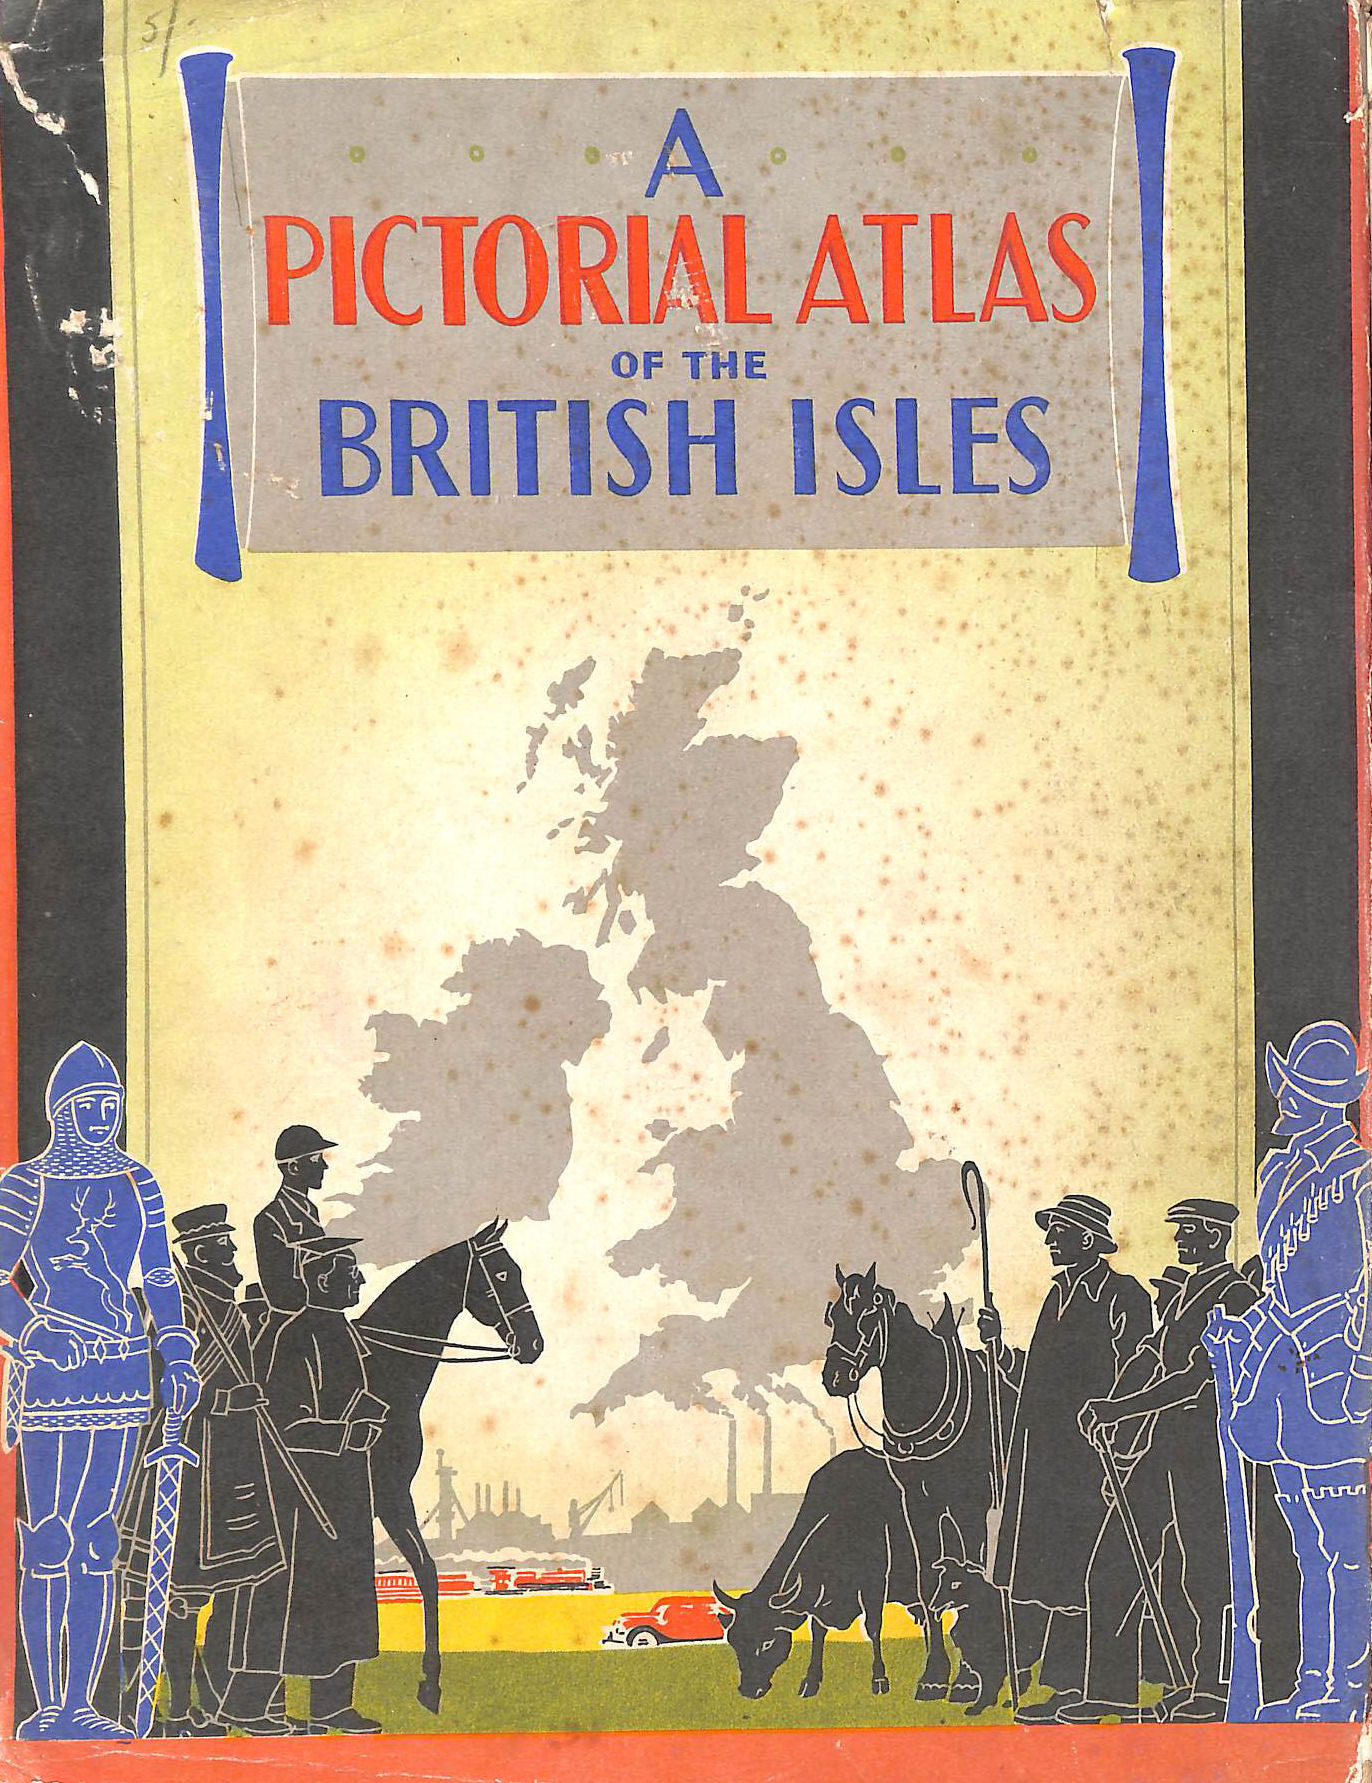 H. ALNWICK - A Pictorial Atlas Of The British Isles